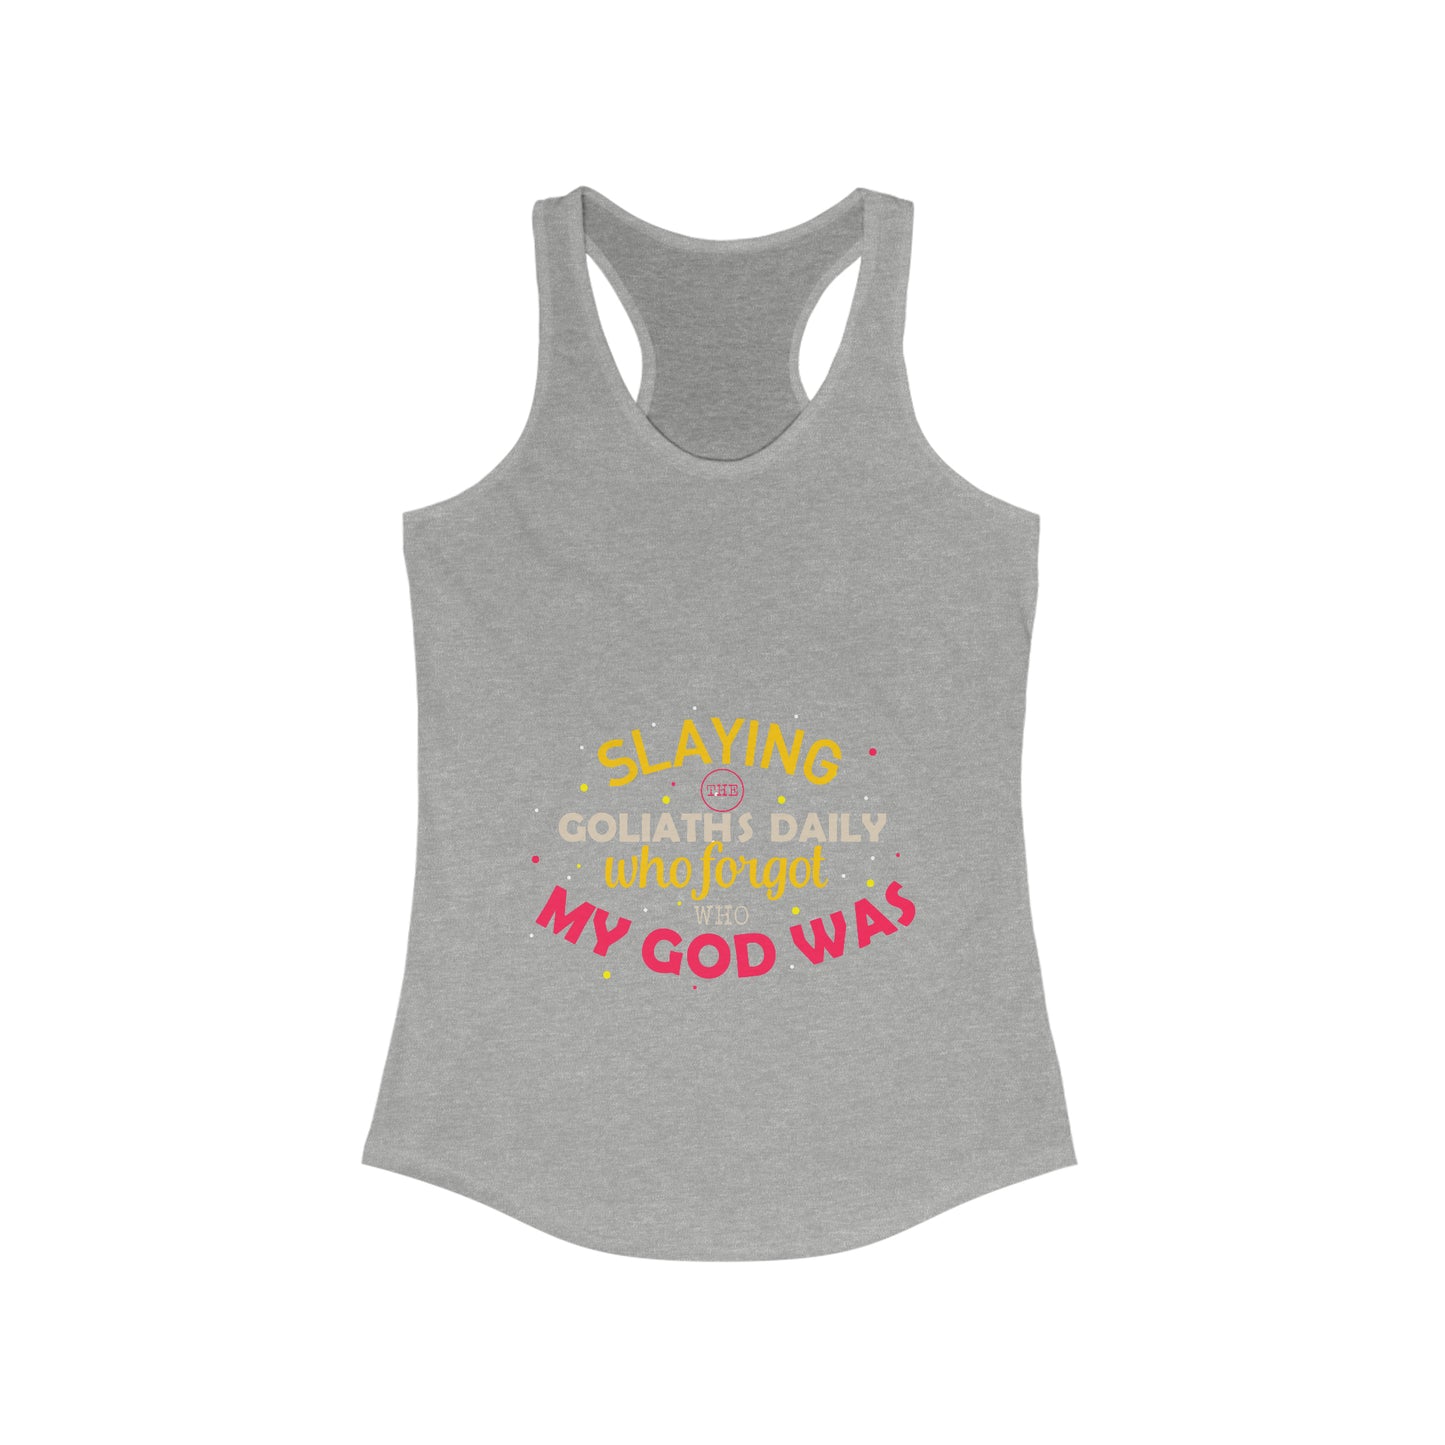 Slaying The Goliath's Daily Who Forgot Who My God Was Slim Fit Tank-top